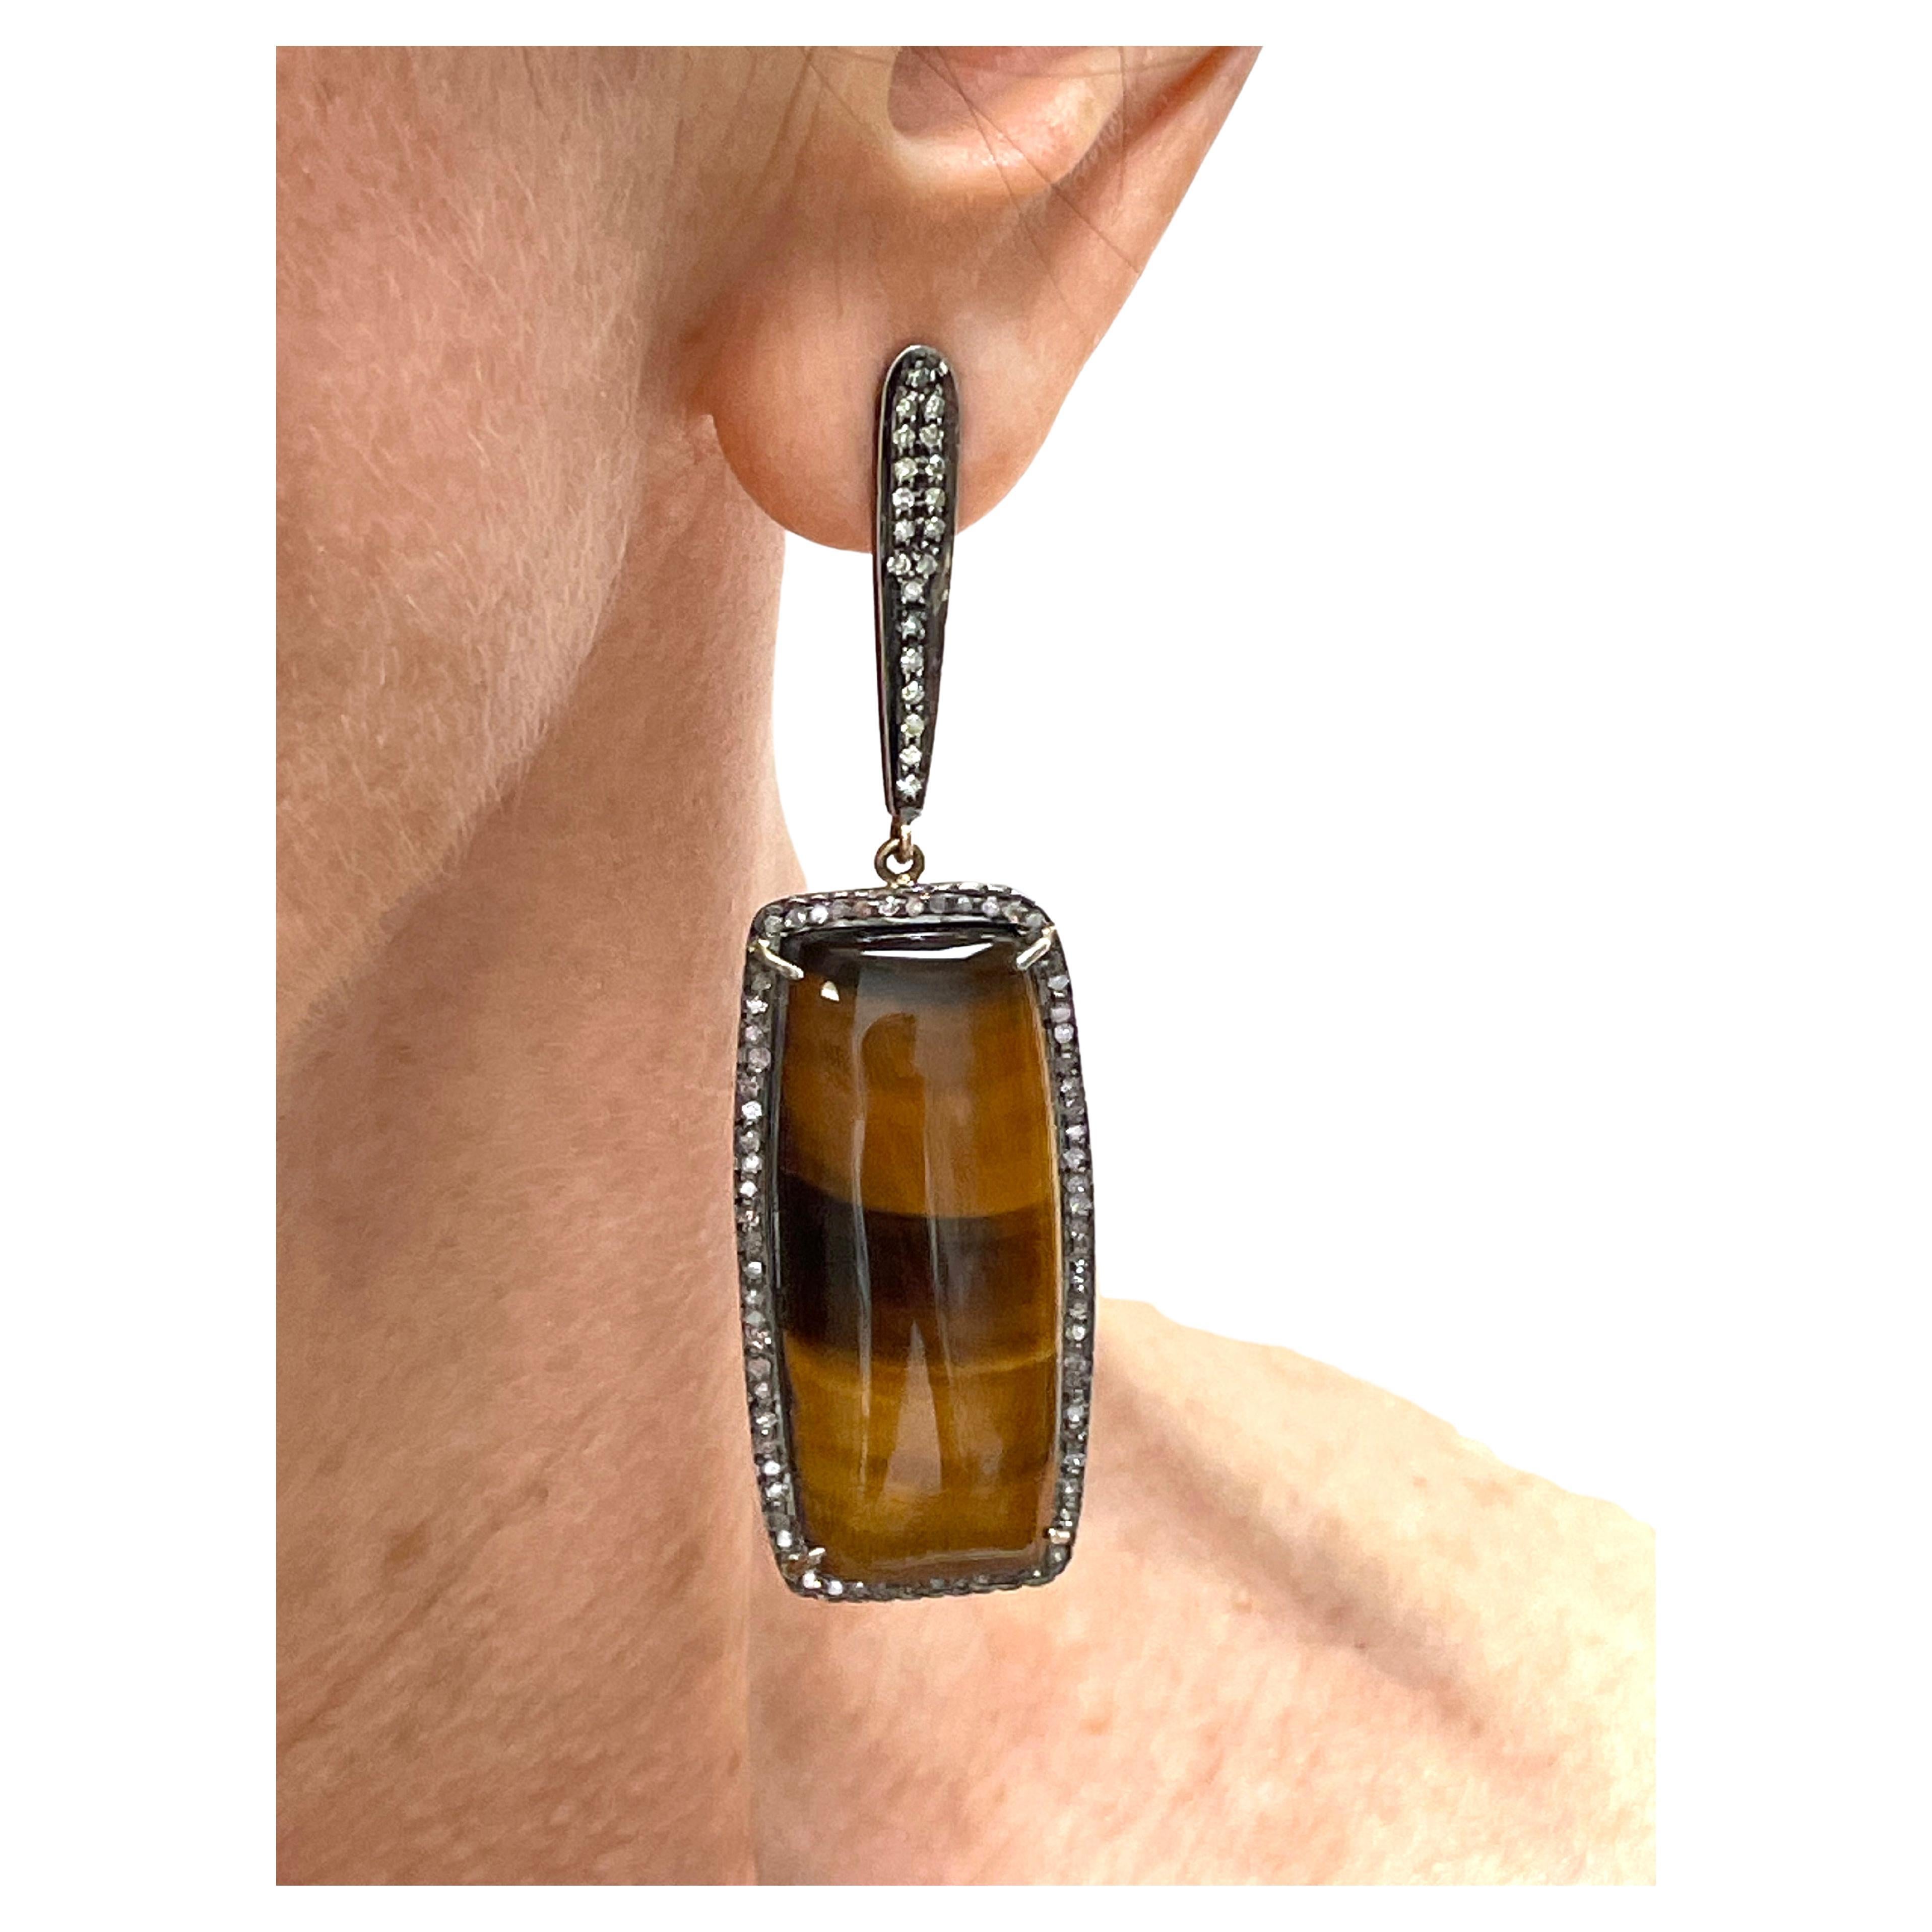 Description
Lustrous, large and mesmerizing beautifully matched pair of cognac and rich brown iridescent Tiger’s Eye cabochons, surrounded with champagne diamonds, dangle from a pave diamond post. The combination of soft color diamonds paired with